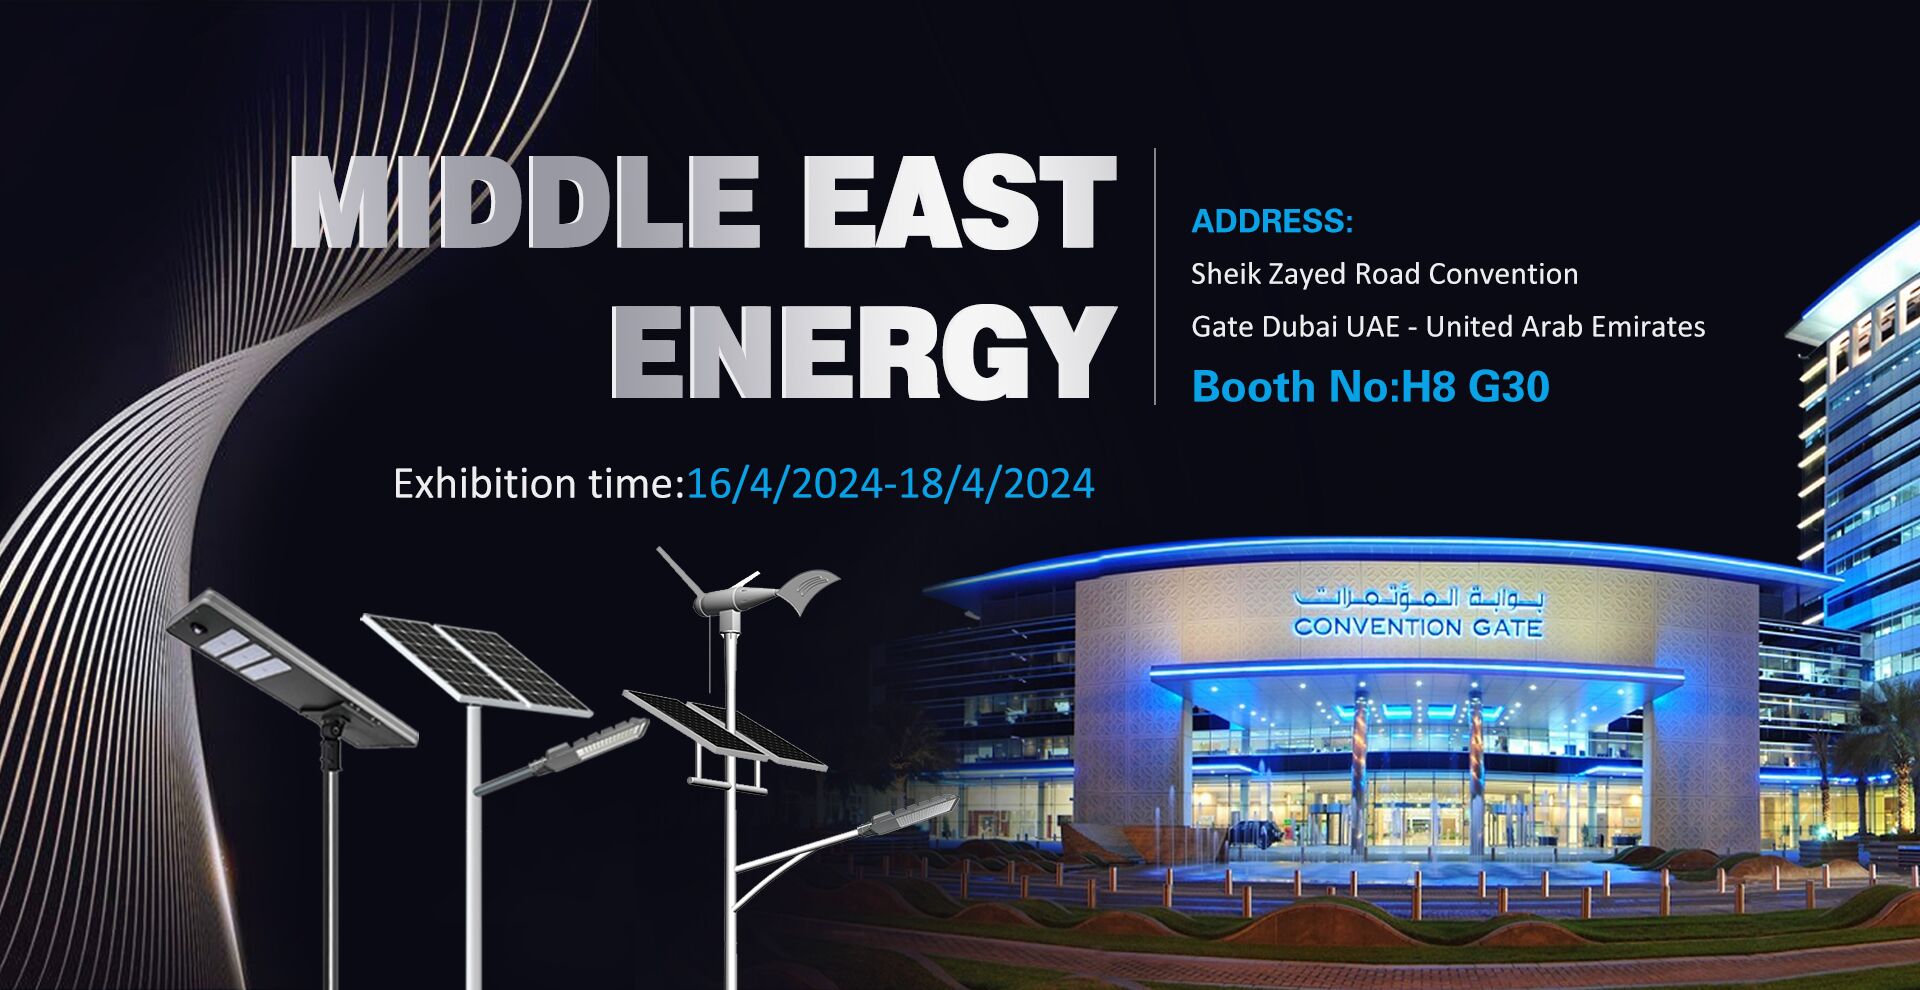 Middle East Energy, we are coming！